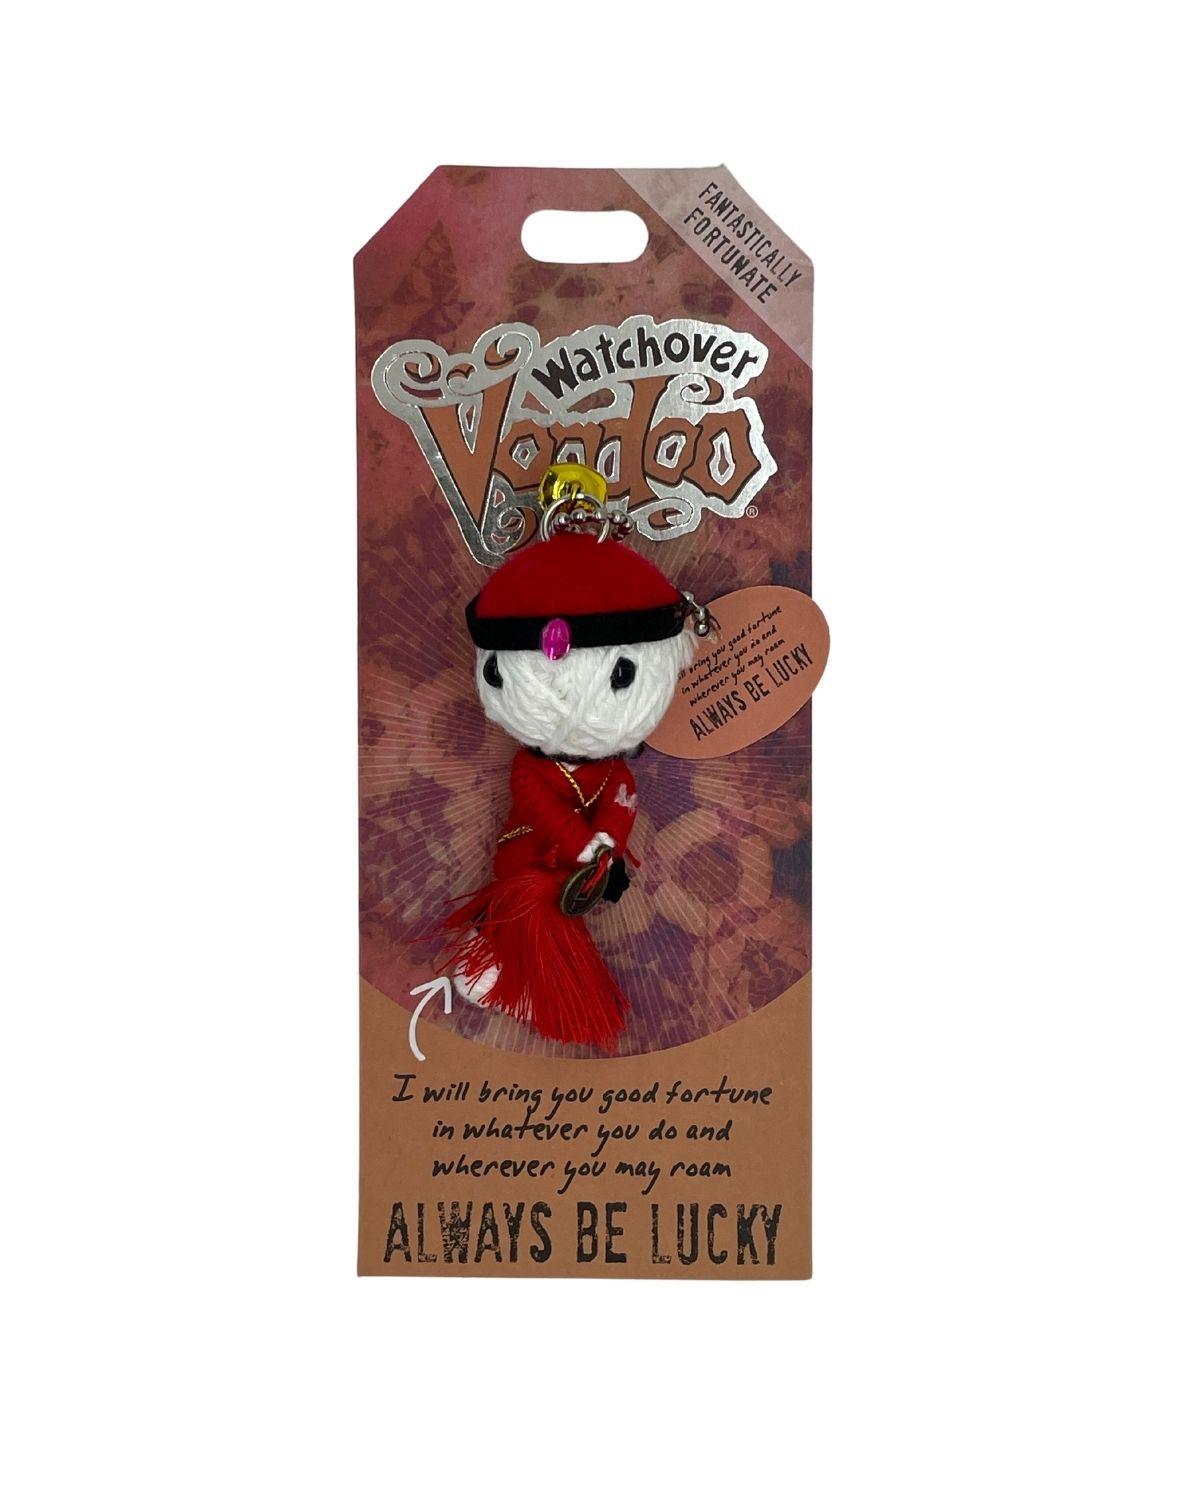 Watchover Voodoo Doll - Always be Lucky - Watchover Voodoo - String Doll